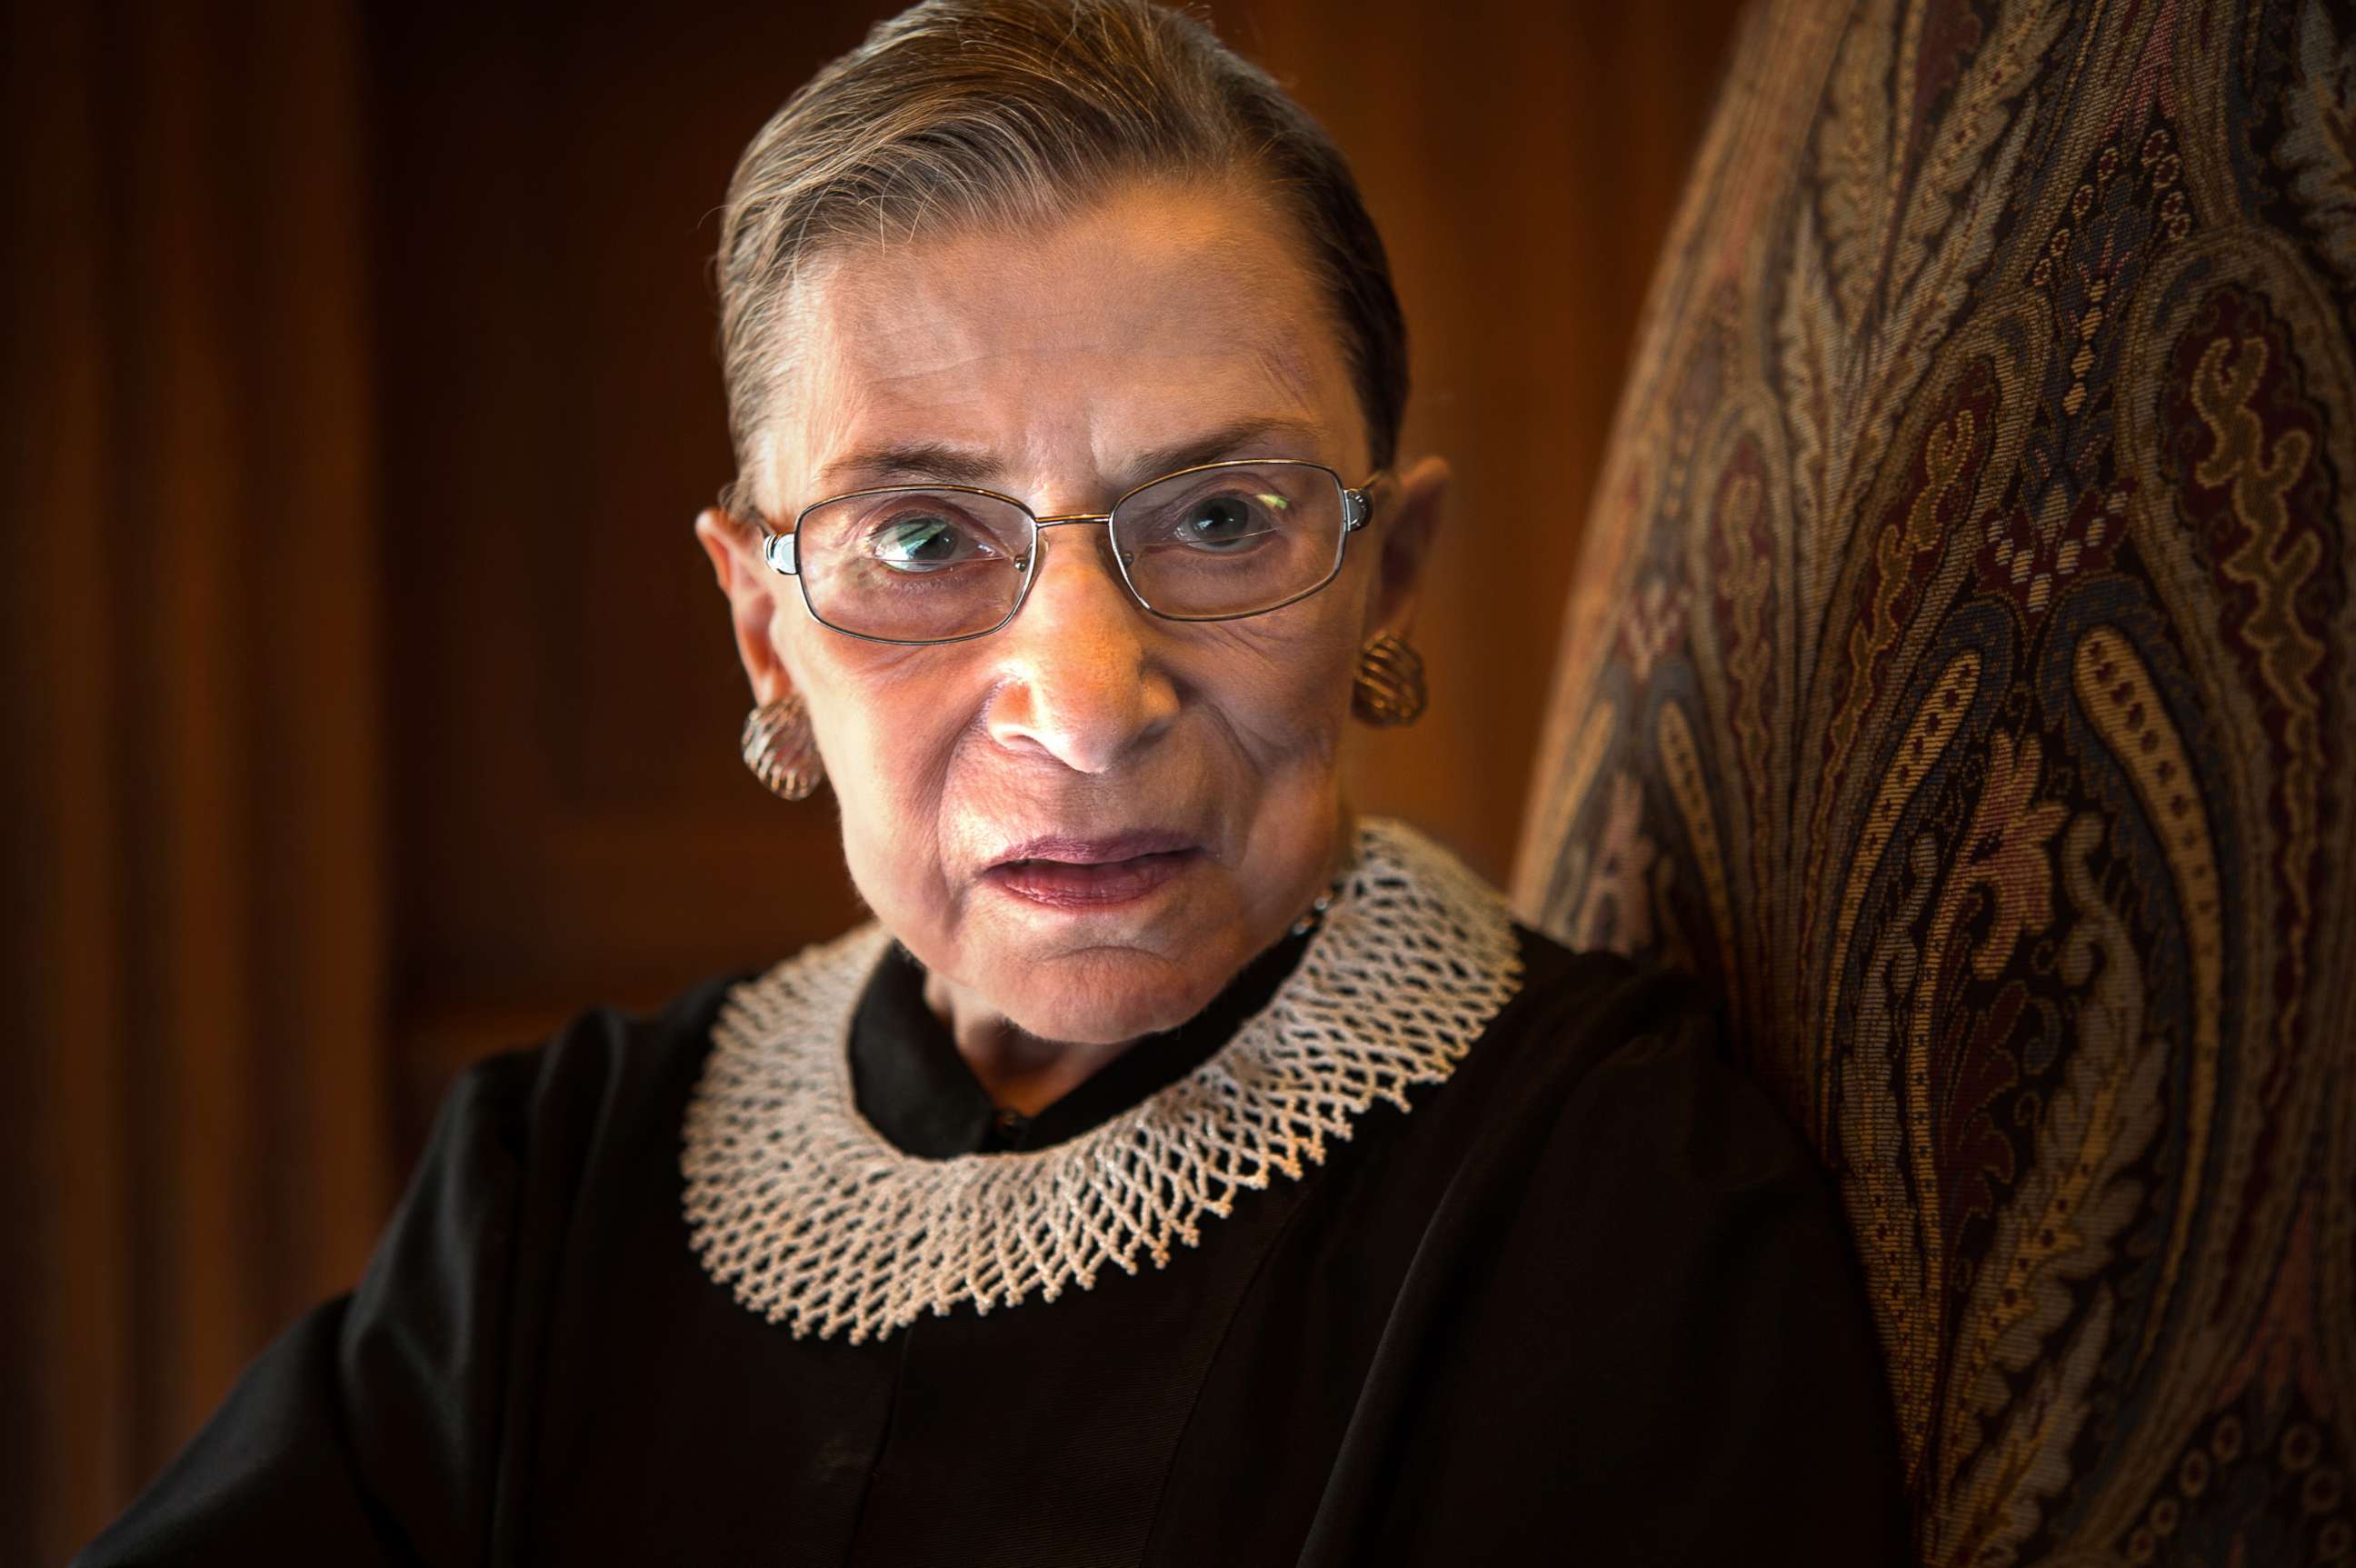 PHOTO: Supreme Court Justice Ruth Bader Ginsburg, celebrating her 20th anniversary on the bench, is photographed in the West conference room at the U.S. Supreme Court in Washington on Aug. 30, 2013.